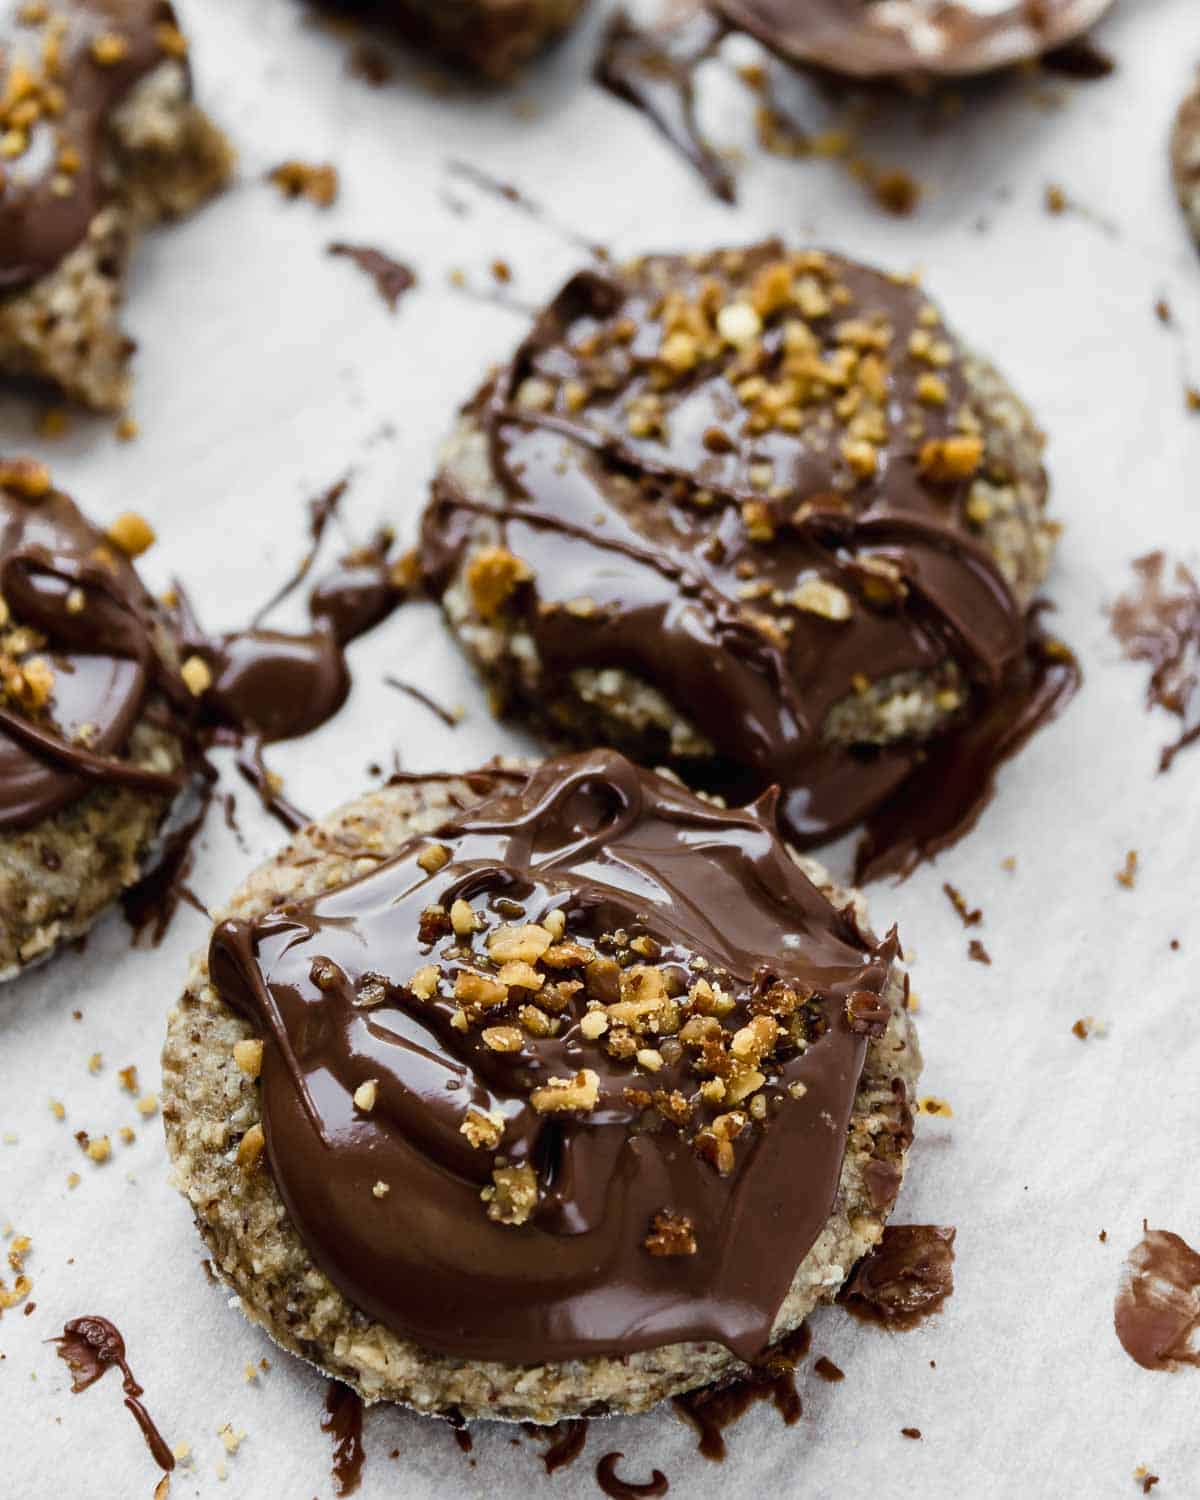 2-Nutella-Hazelnut-Cookies-with-nutella-and-hazelnuts-on-top